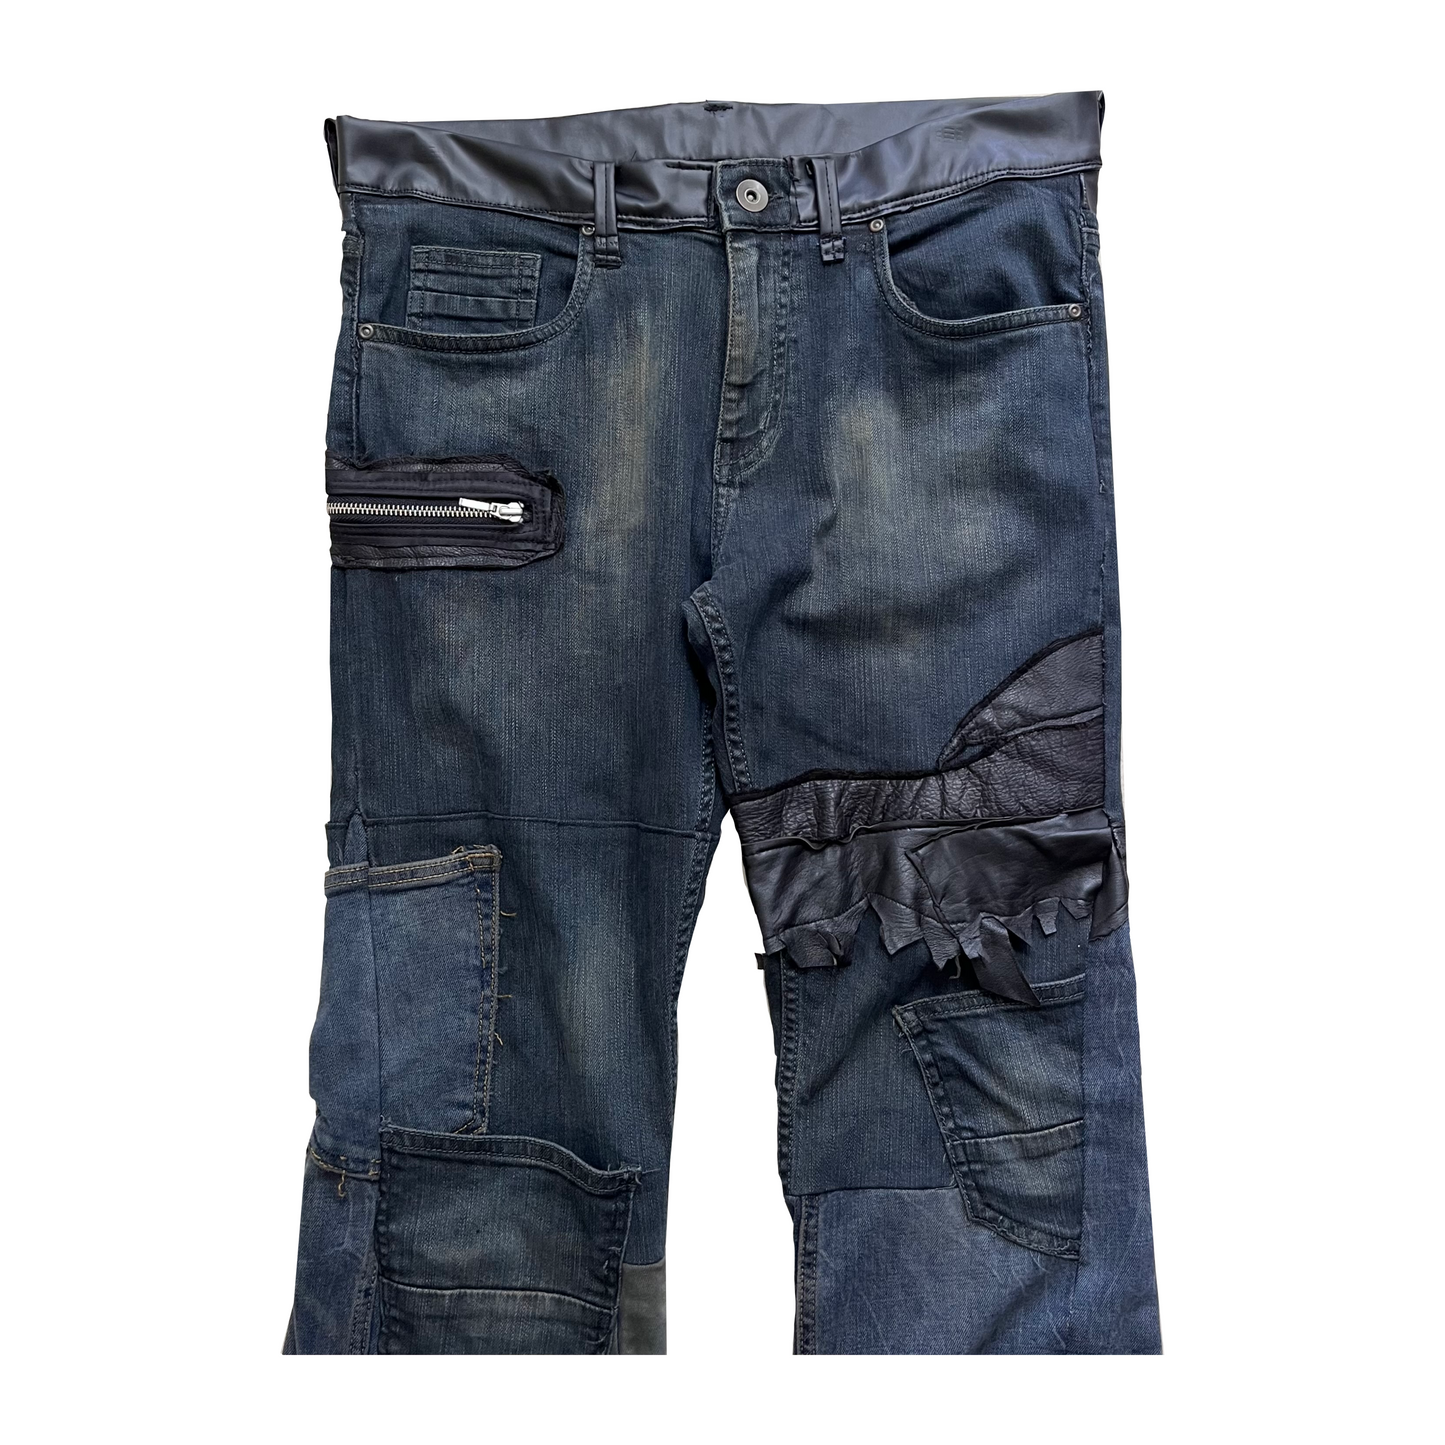 Leather/ Denim Hybrid Reconstructed Flared Jeans